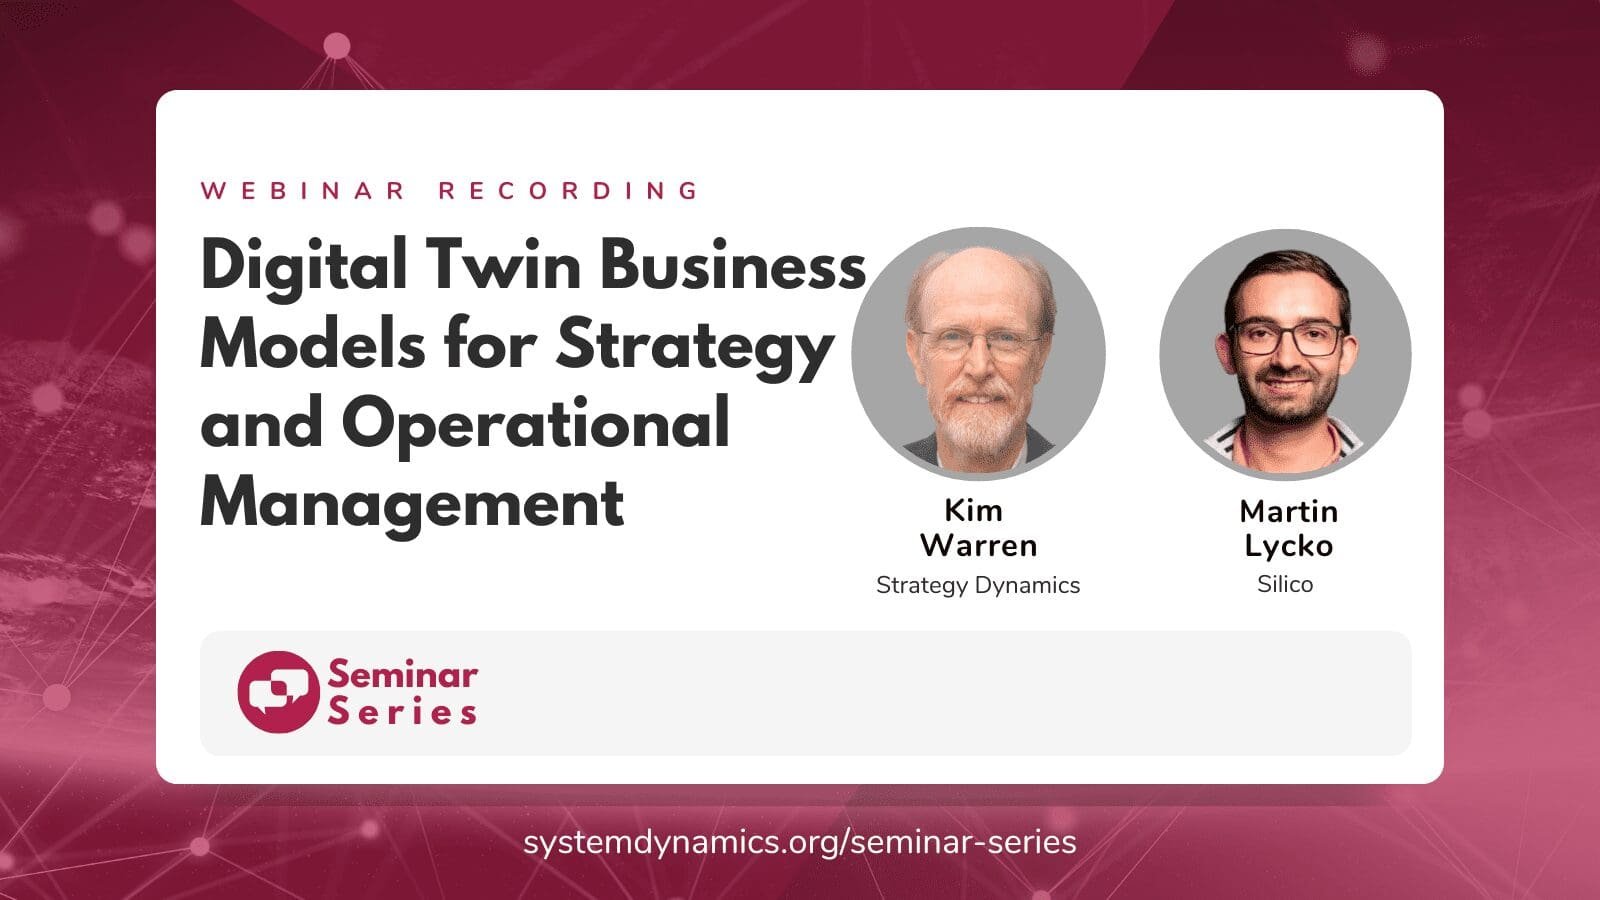 Webinar Highlights & Recording: Digital Twin Business Models for Strategy and Operational Management